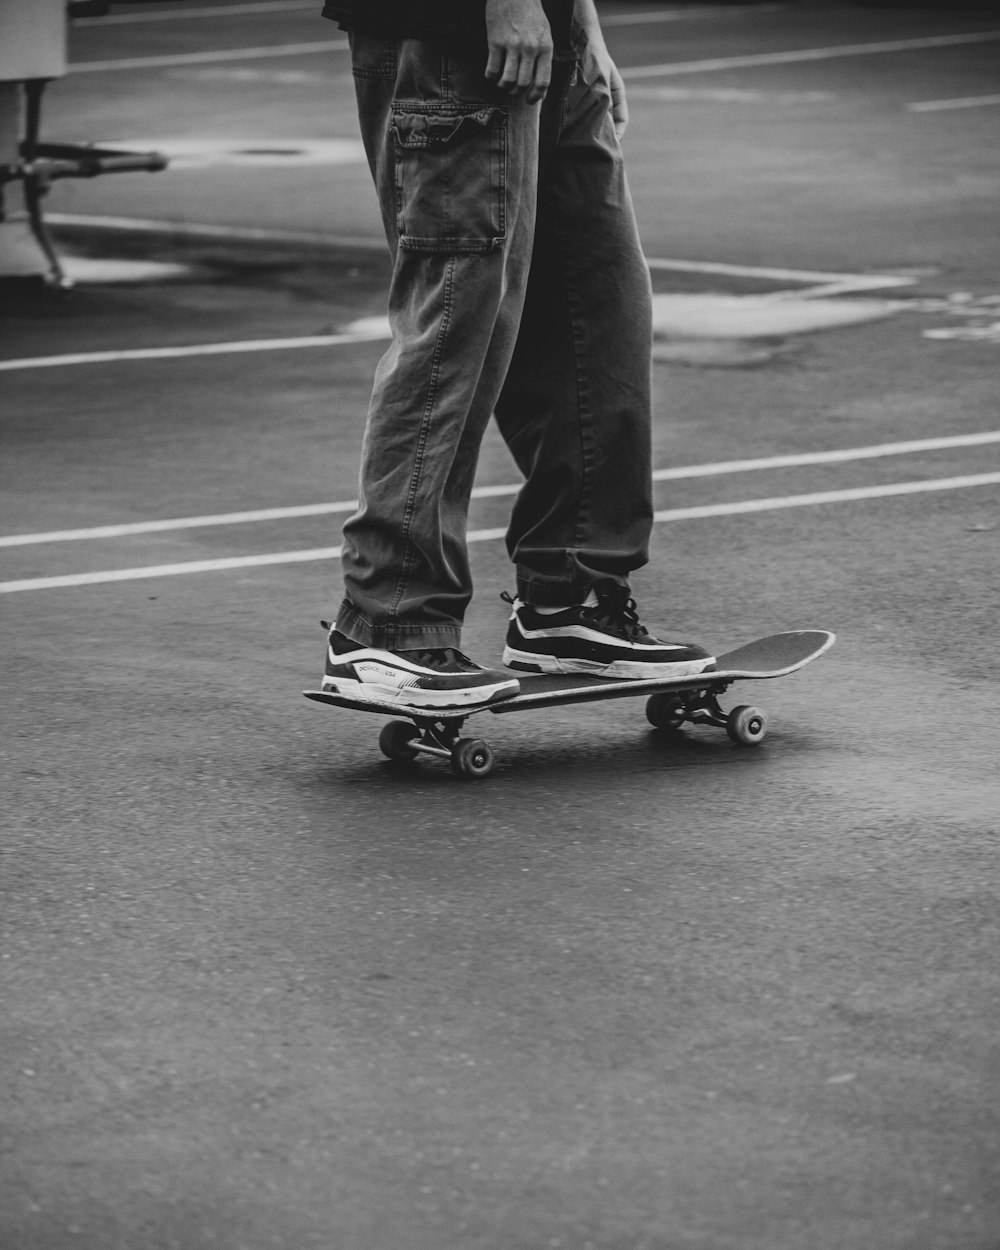 man in black pants and black sneakers riding skateboard on gray concrete road during daytime